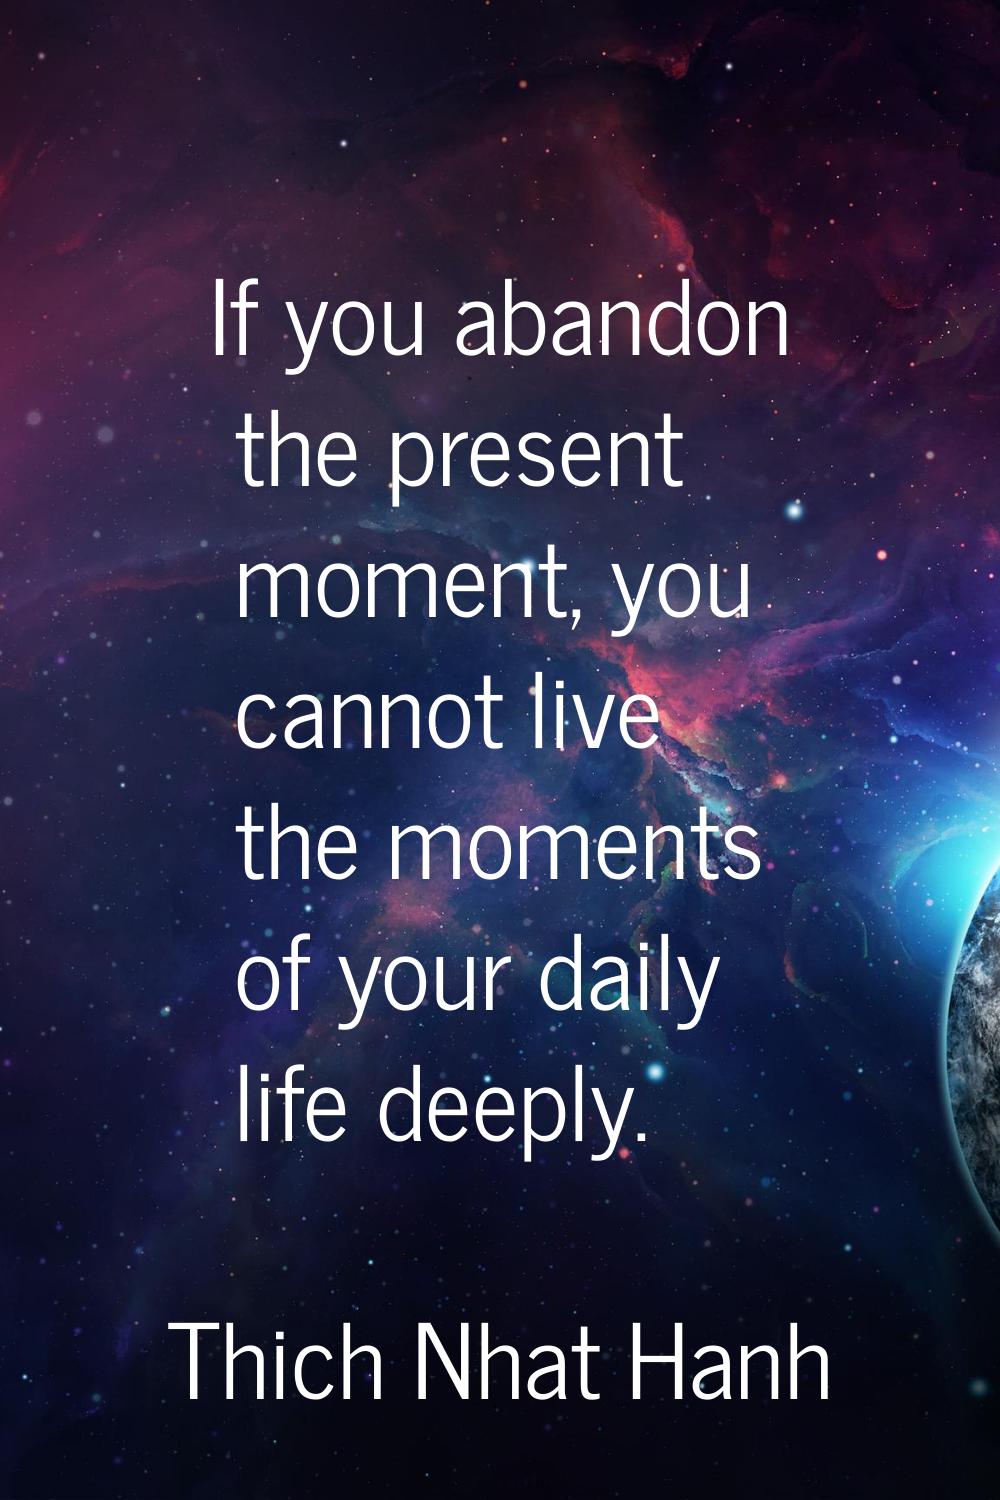 If you abandon the present moment, you cannot live the moments of your daily life deeply.